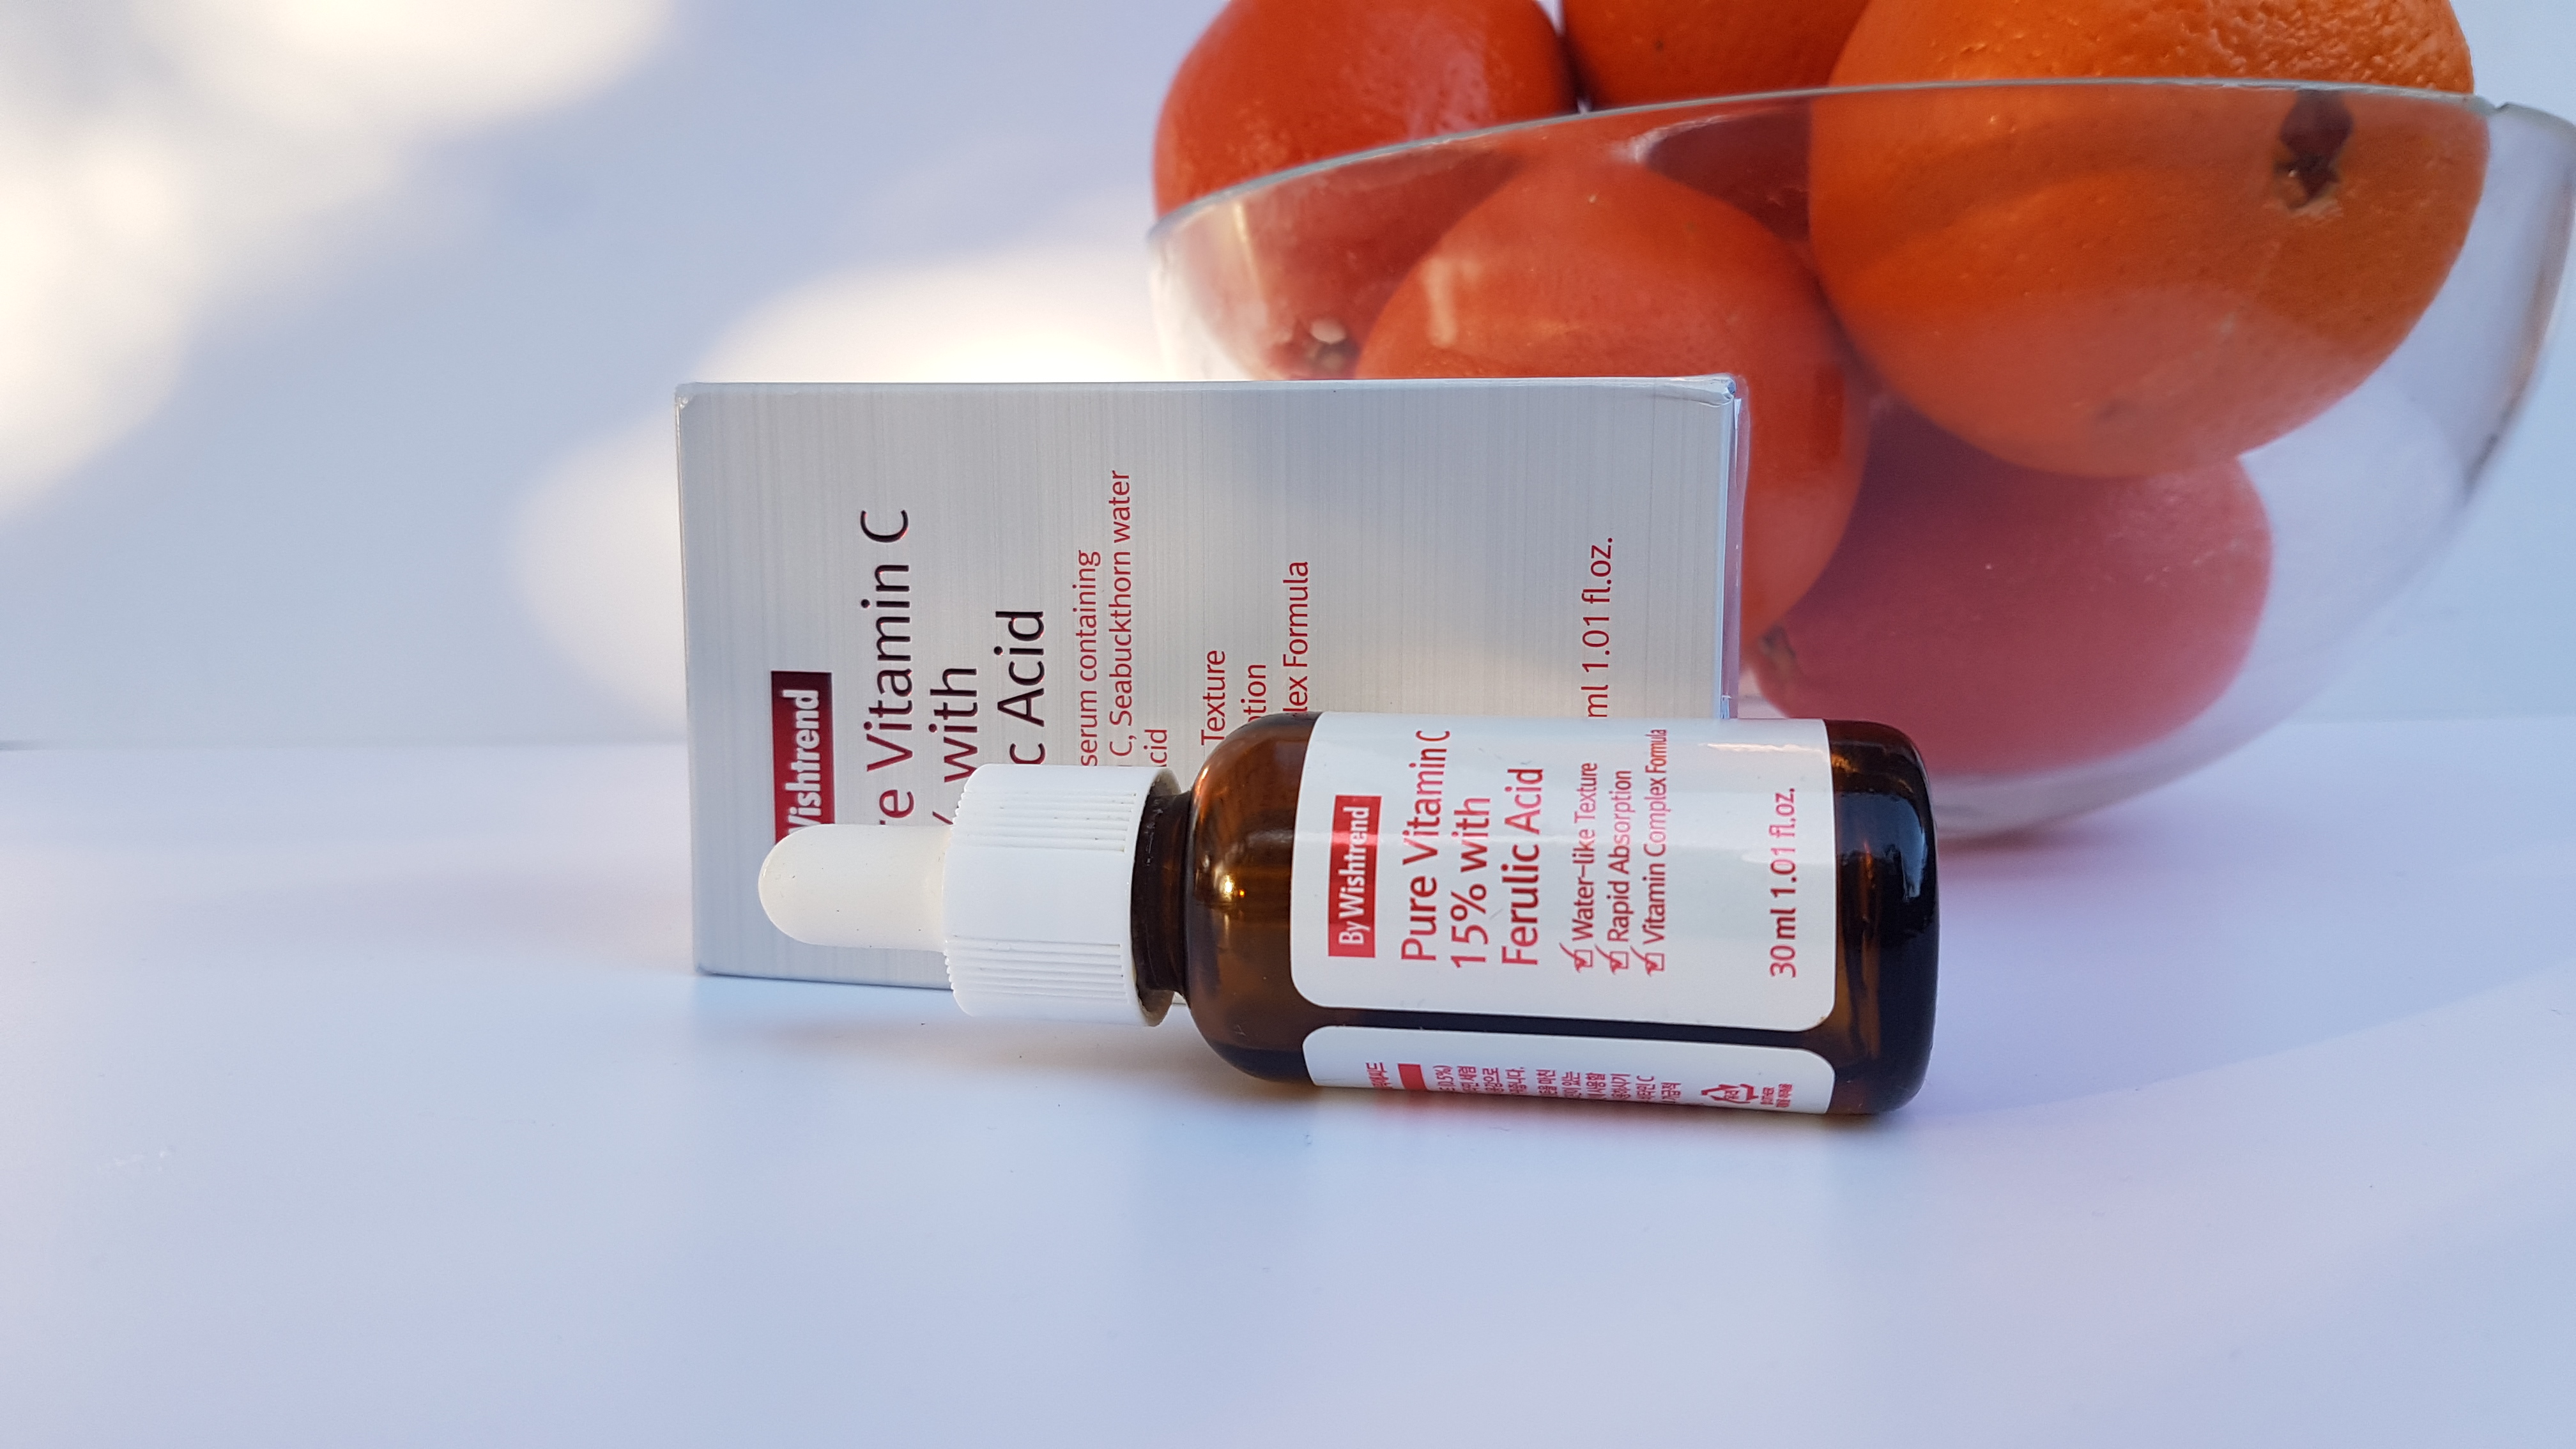 ByWishtrend Pure Vitamin C 15% with Ferulic Acid Ingredients